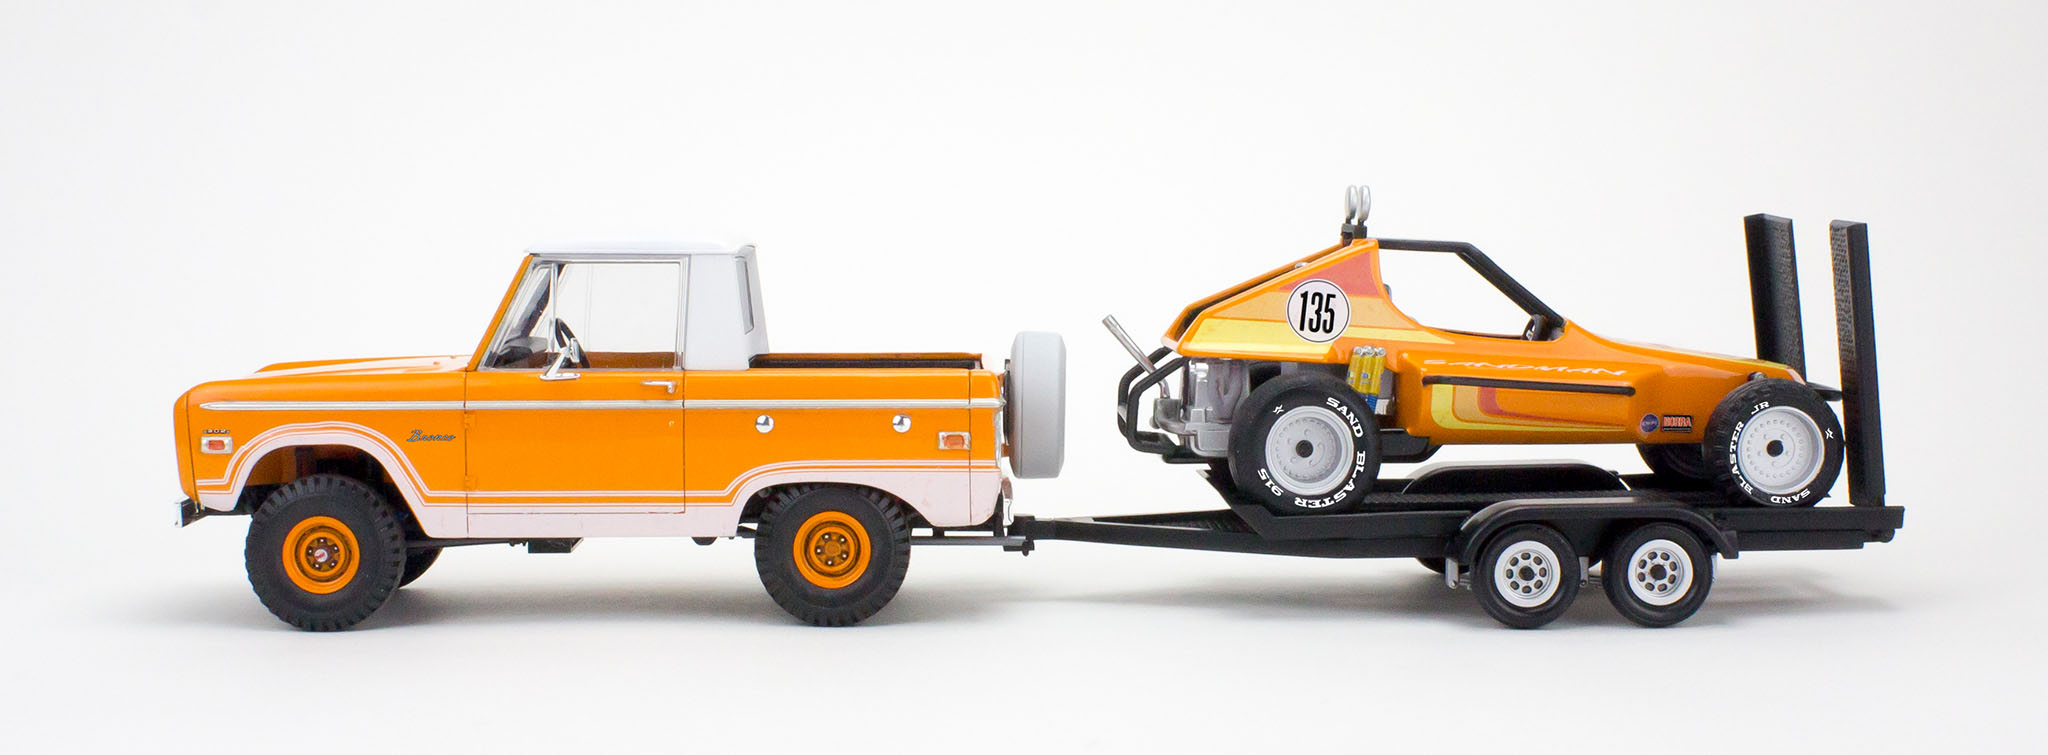 revell-USA-85-7228-Ford-Bronco-Half-Cab-with-aircooled-Volkswagen-engined-dune-buggy-trailer